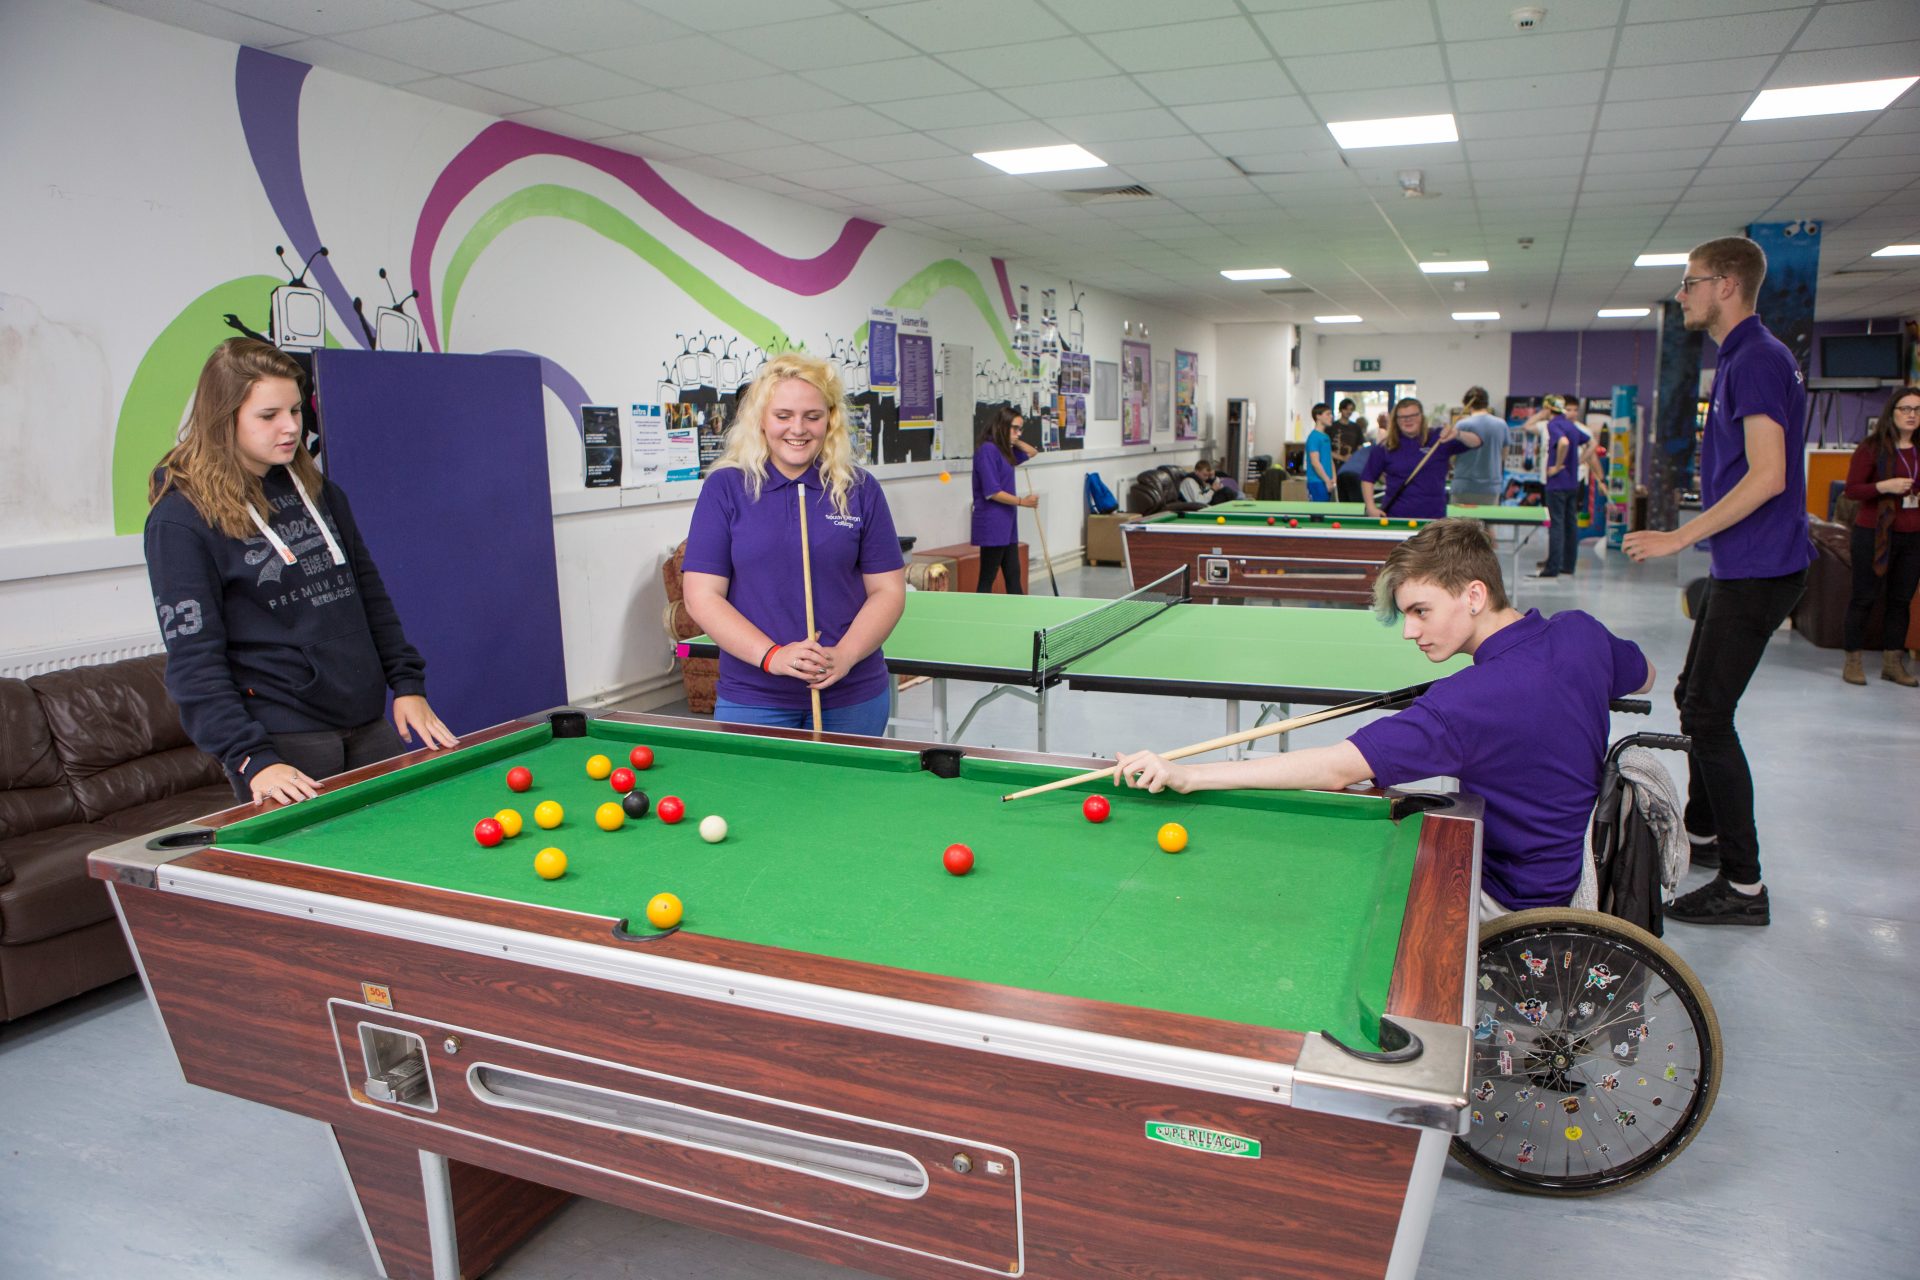 Students playing pool in the student union common room